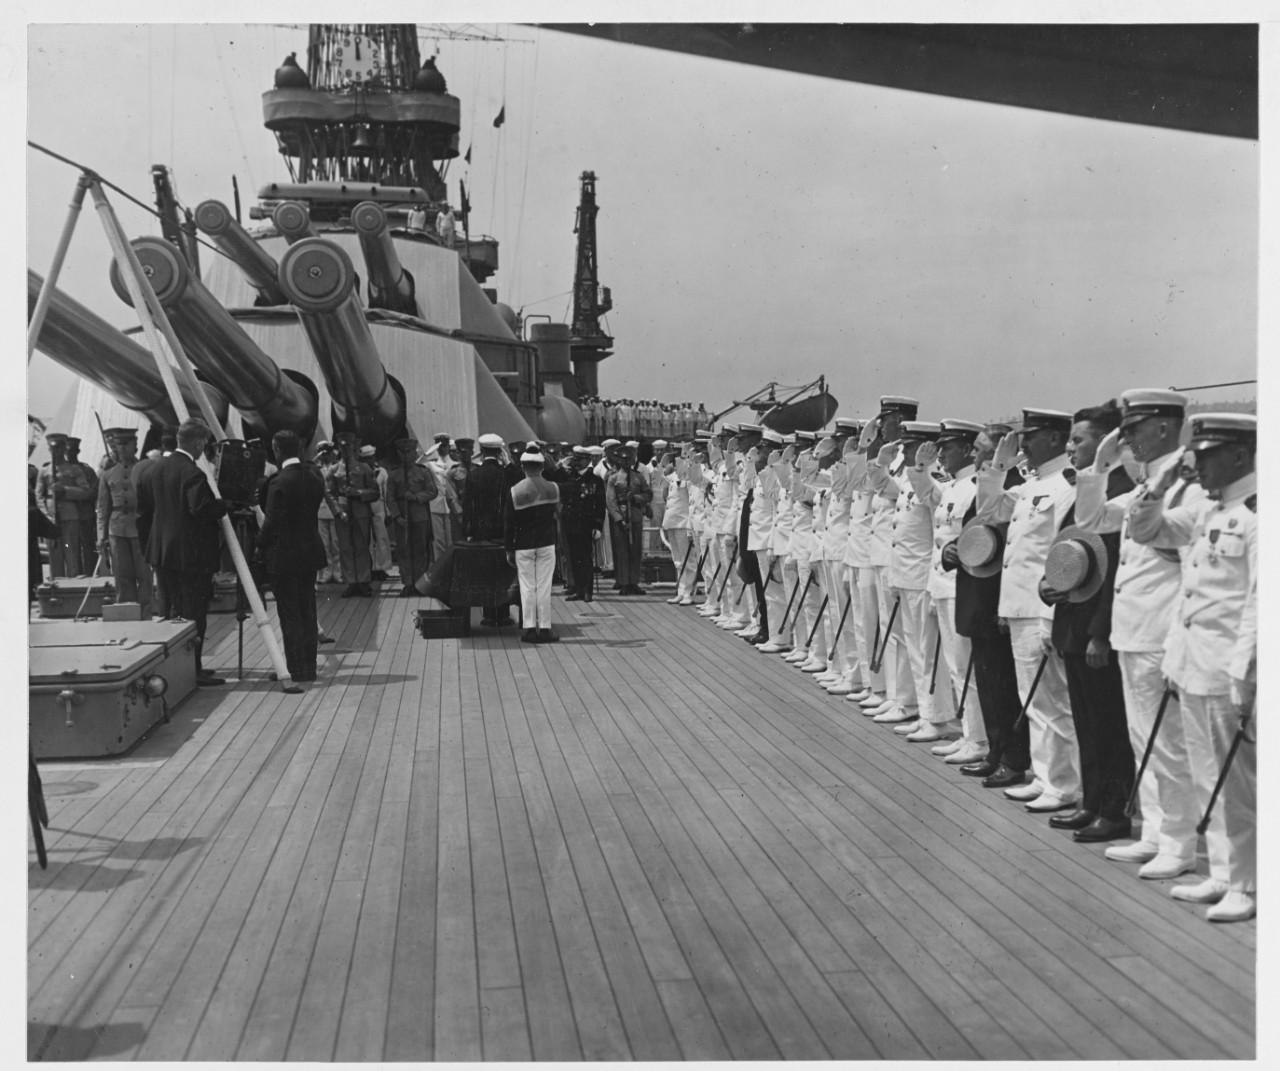 General View of Ceremonies on the Deck of the USS PENNSYLVANIA